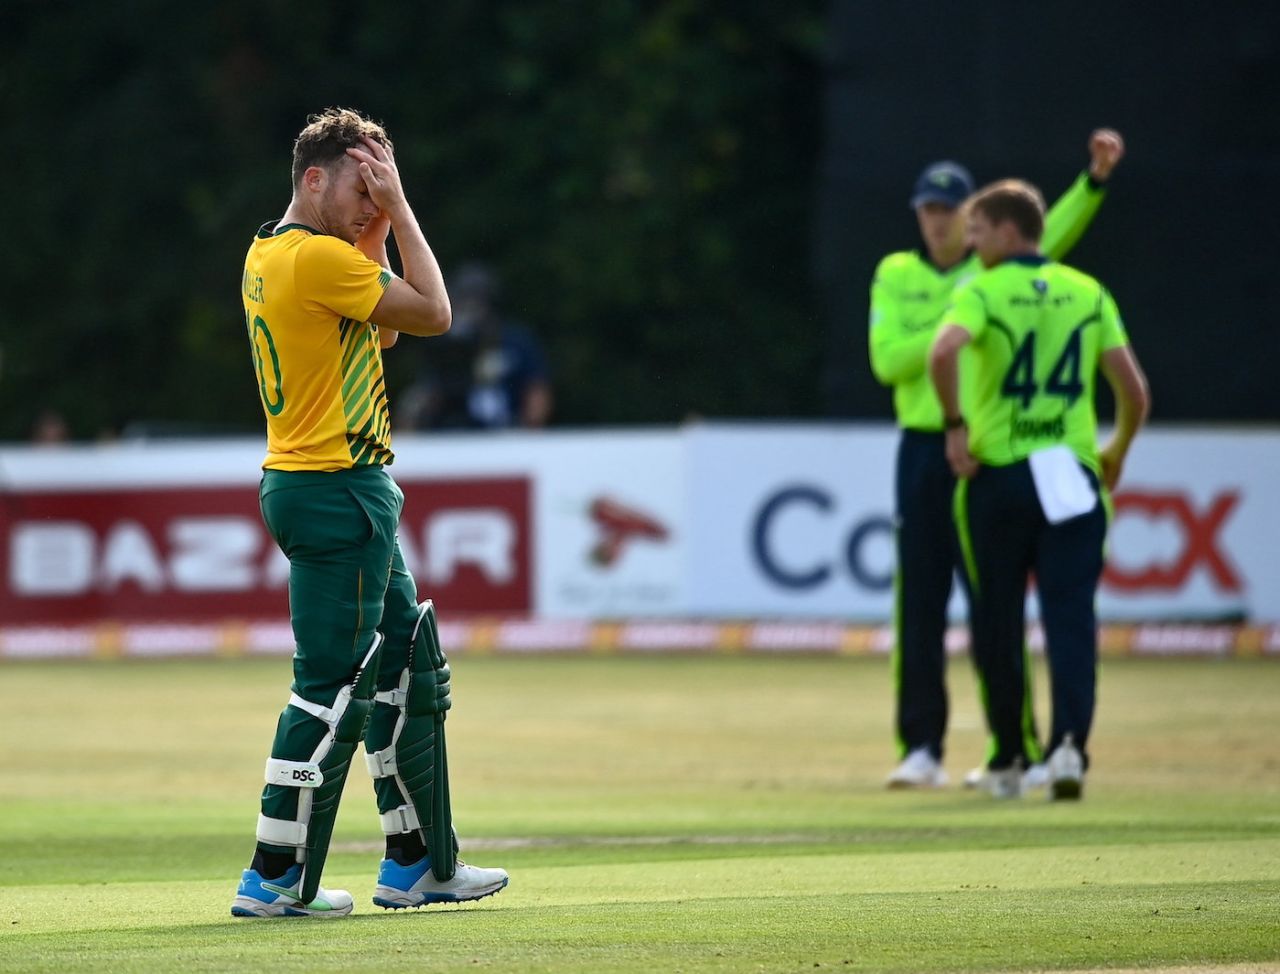 David Miller takes a break during his quickfire knock, Ireland vs South Africa, 2nd T20I, Belfast, July 22, 2021